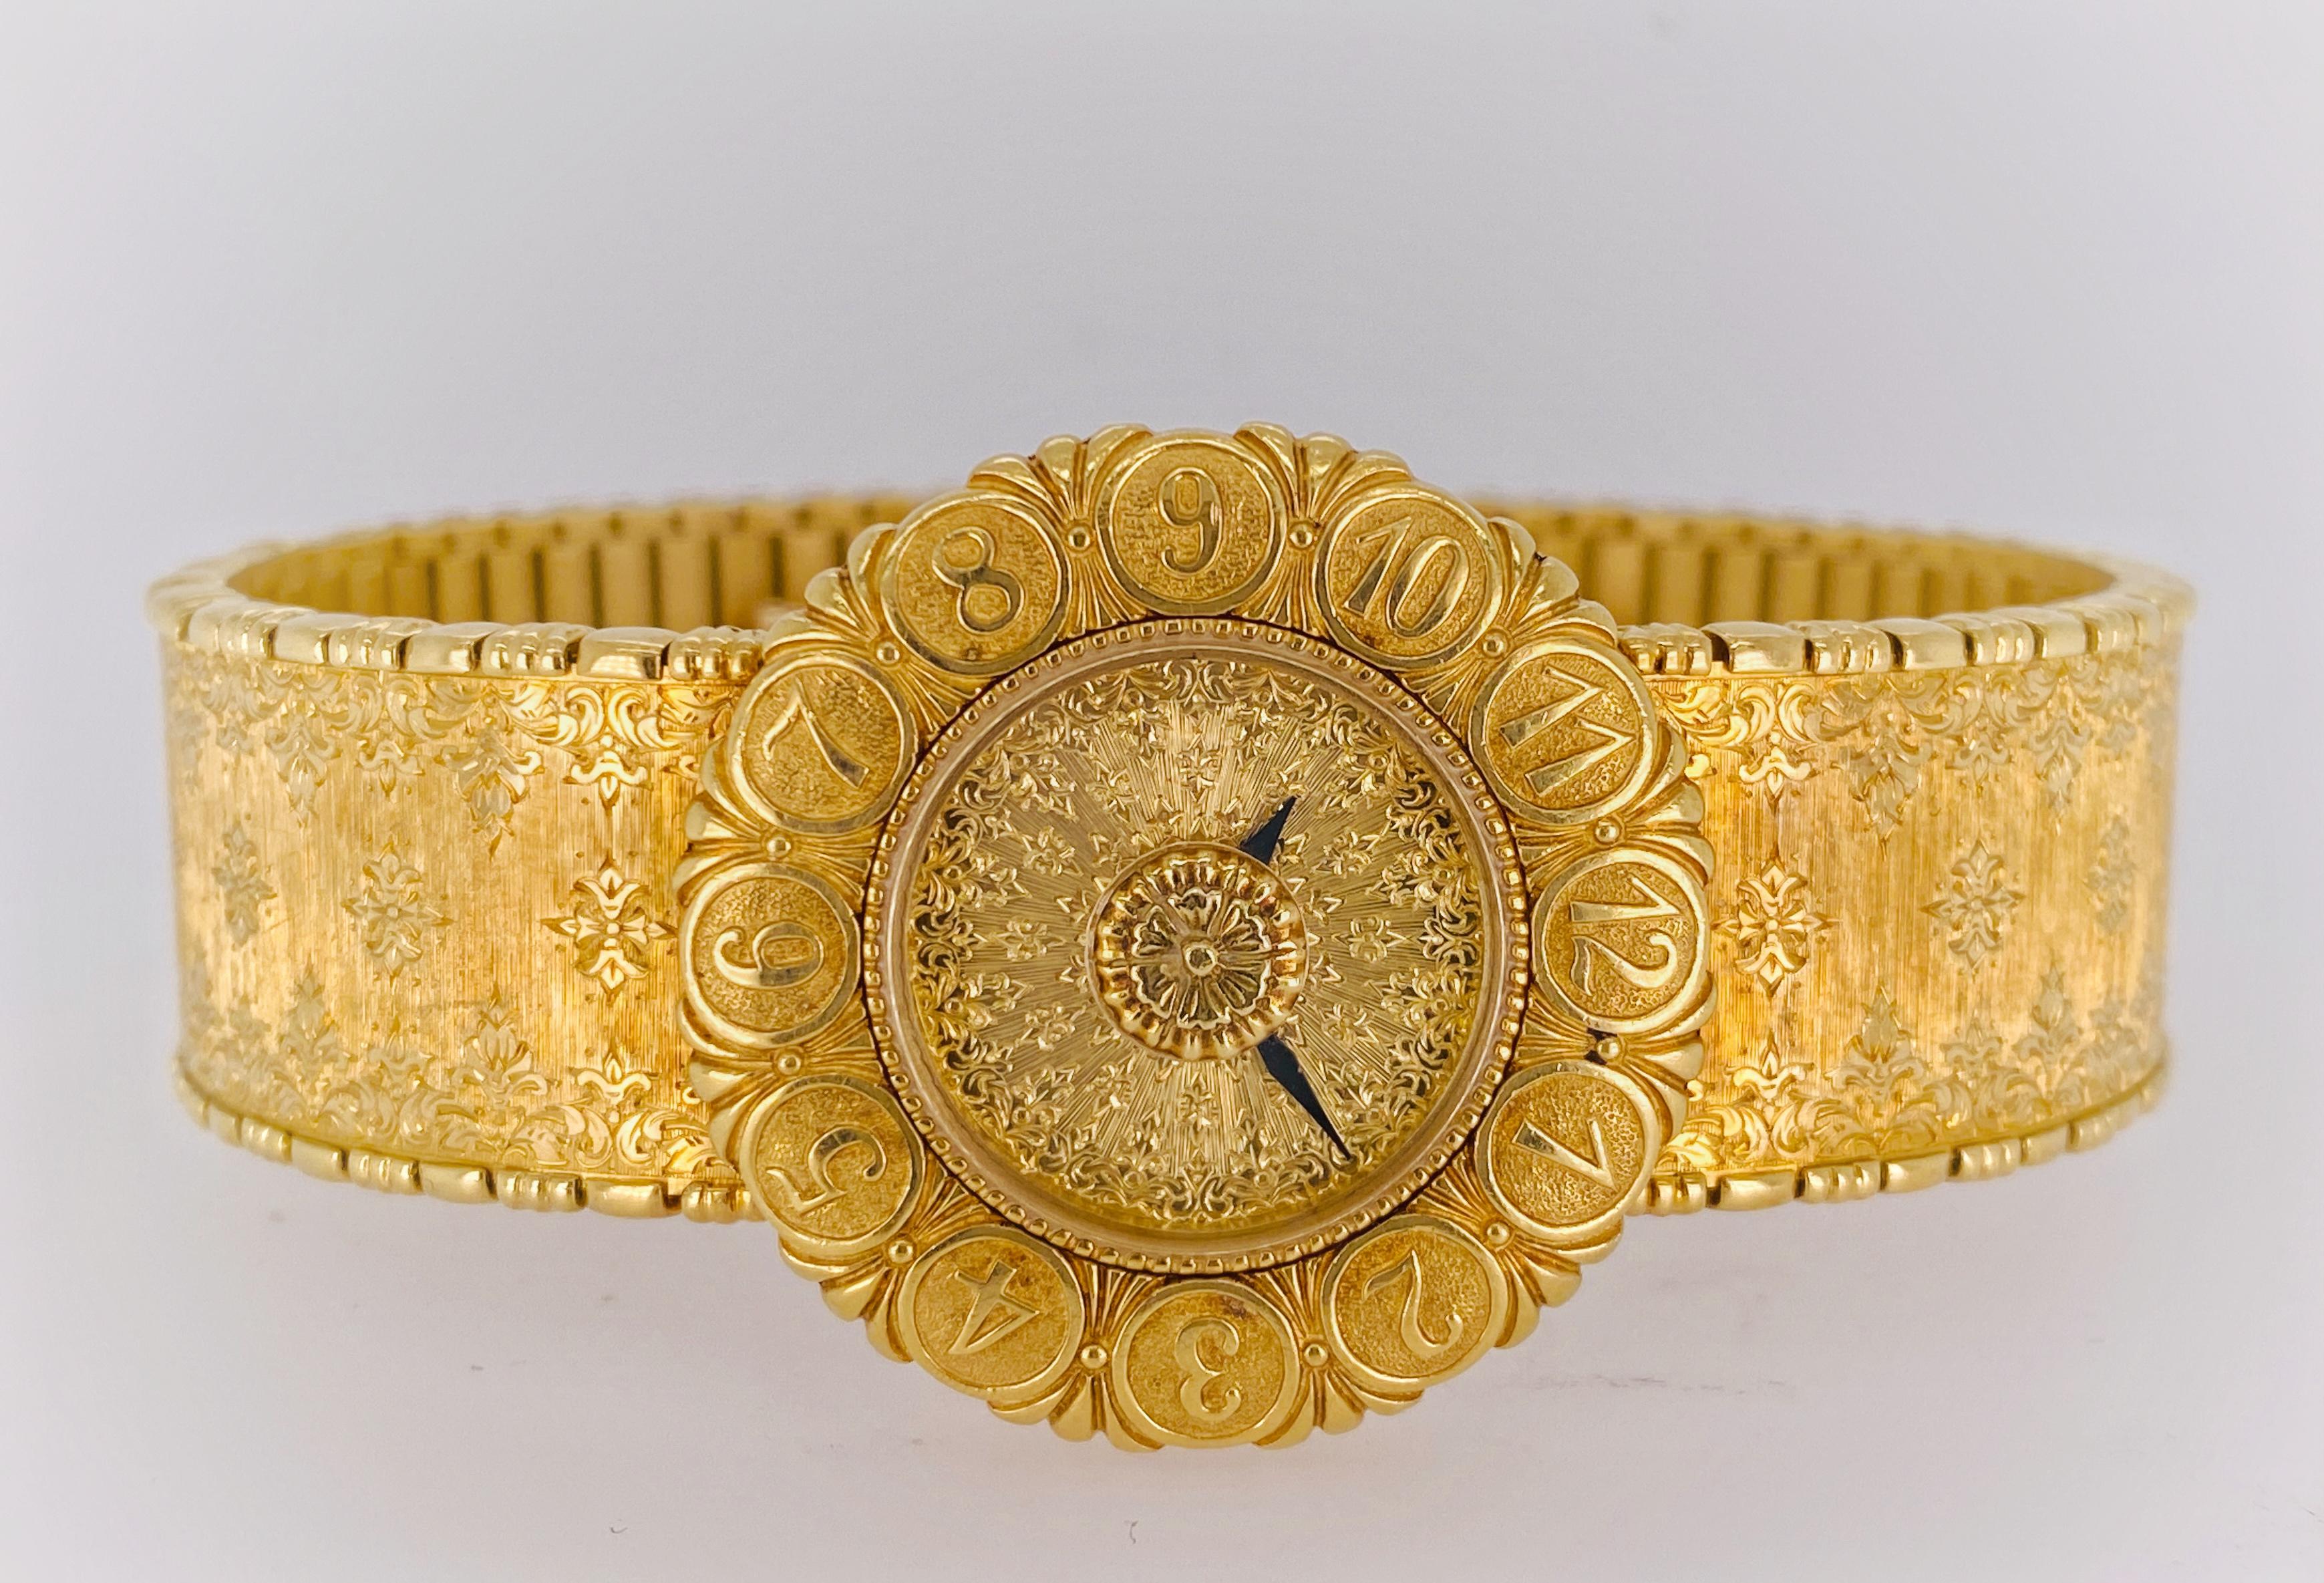 Buccellati Ladies Eliochron, engraved 18k gold watch.
Signed Gianmaria Buccellati, Eliochron,  Style F002,  Serial No. 004 / 100, Gold mark 750, plus Hallmarks.  Includes original Buccellati Watch Box.

Specifications:
Engraved Dial, Engraved Arabic